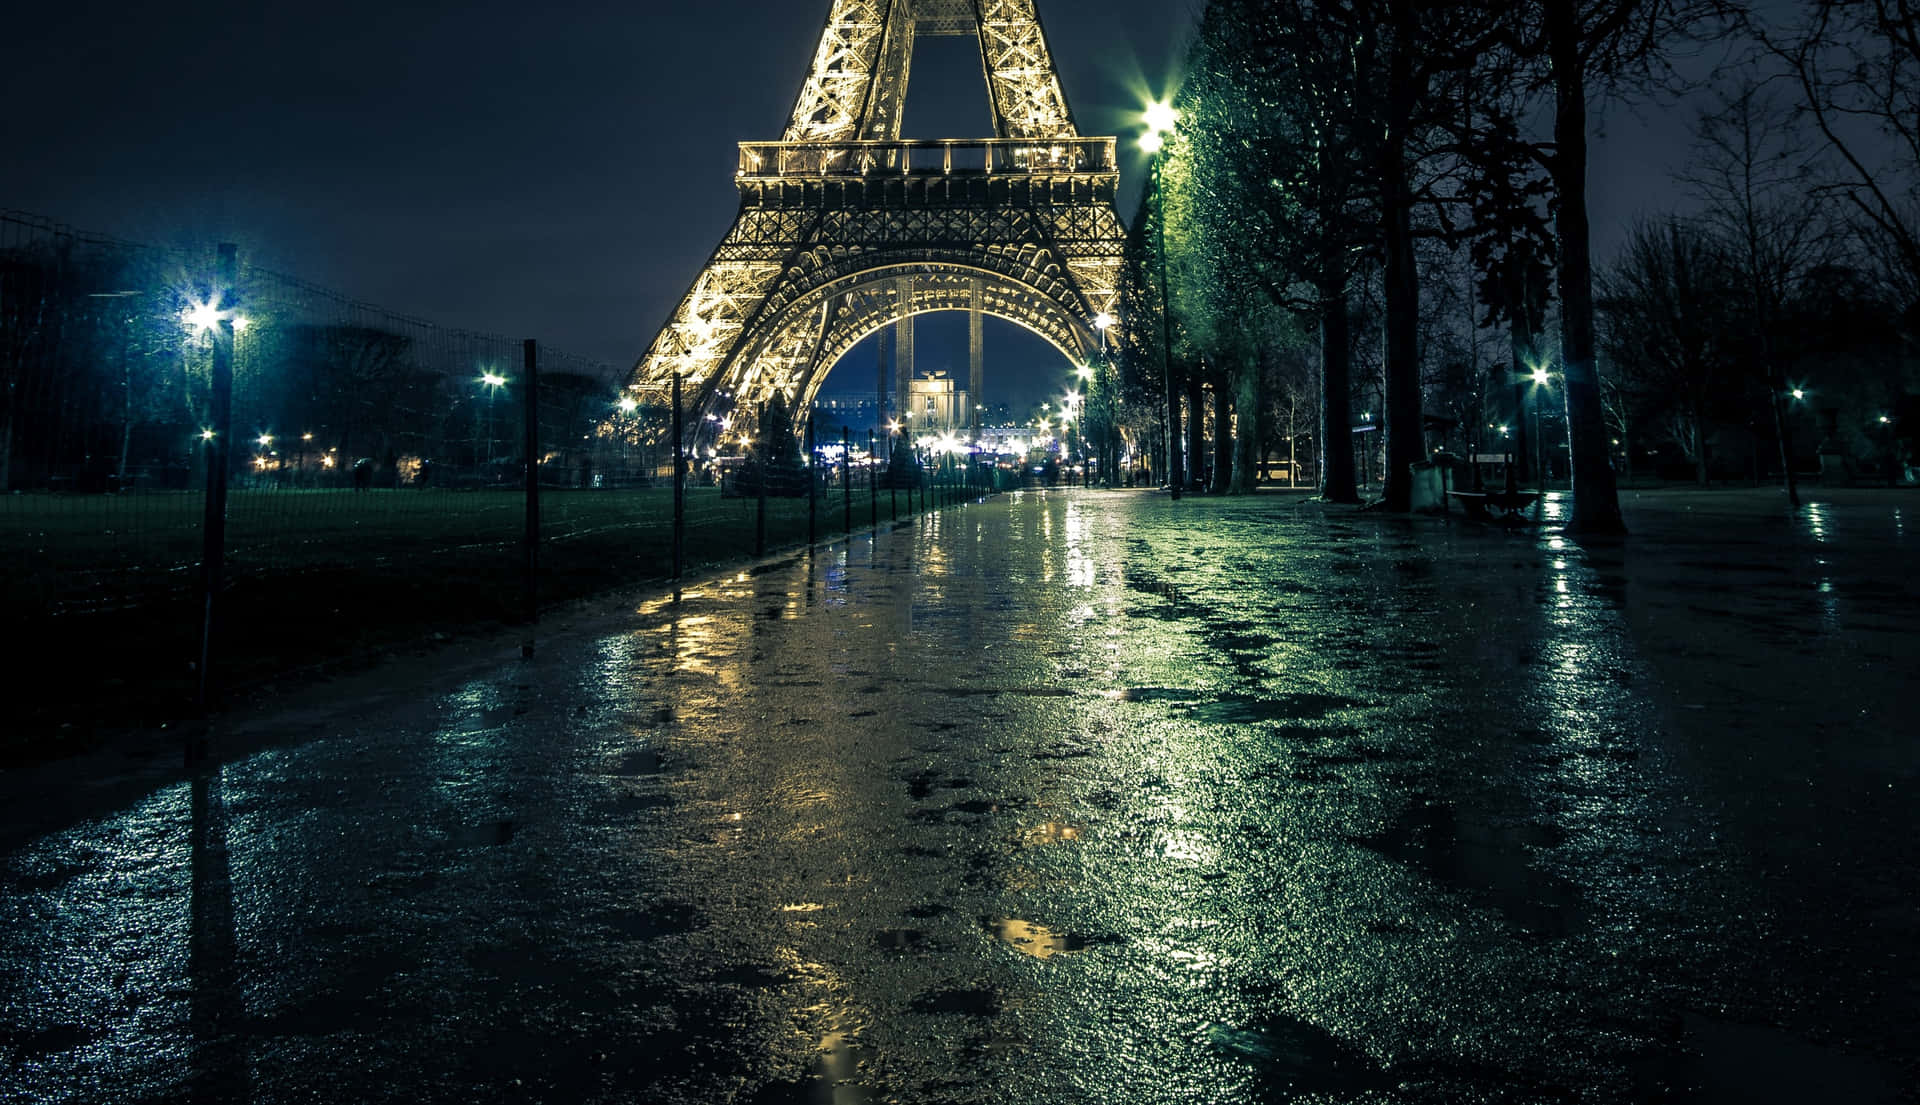 Wet Street Eiffel Tower At Night Picture